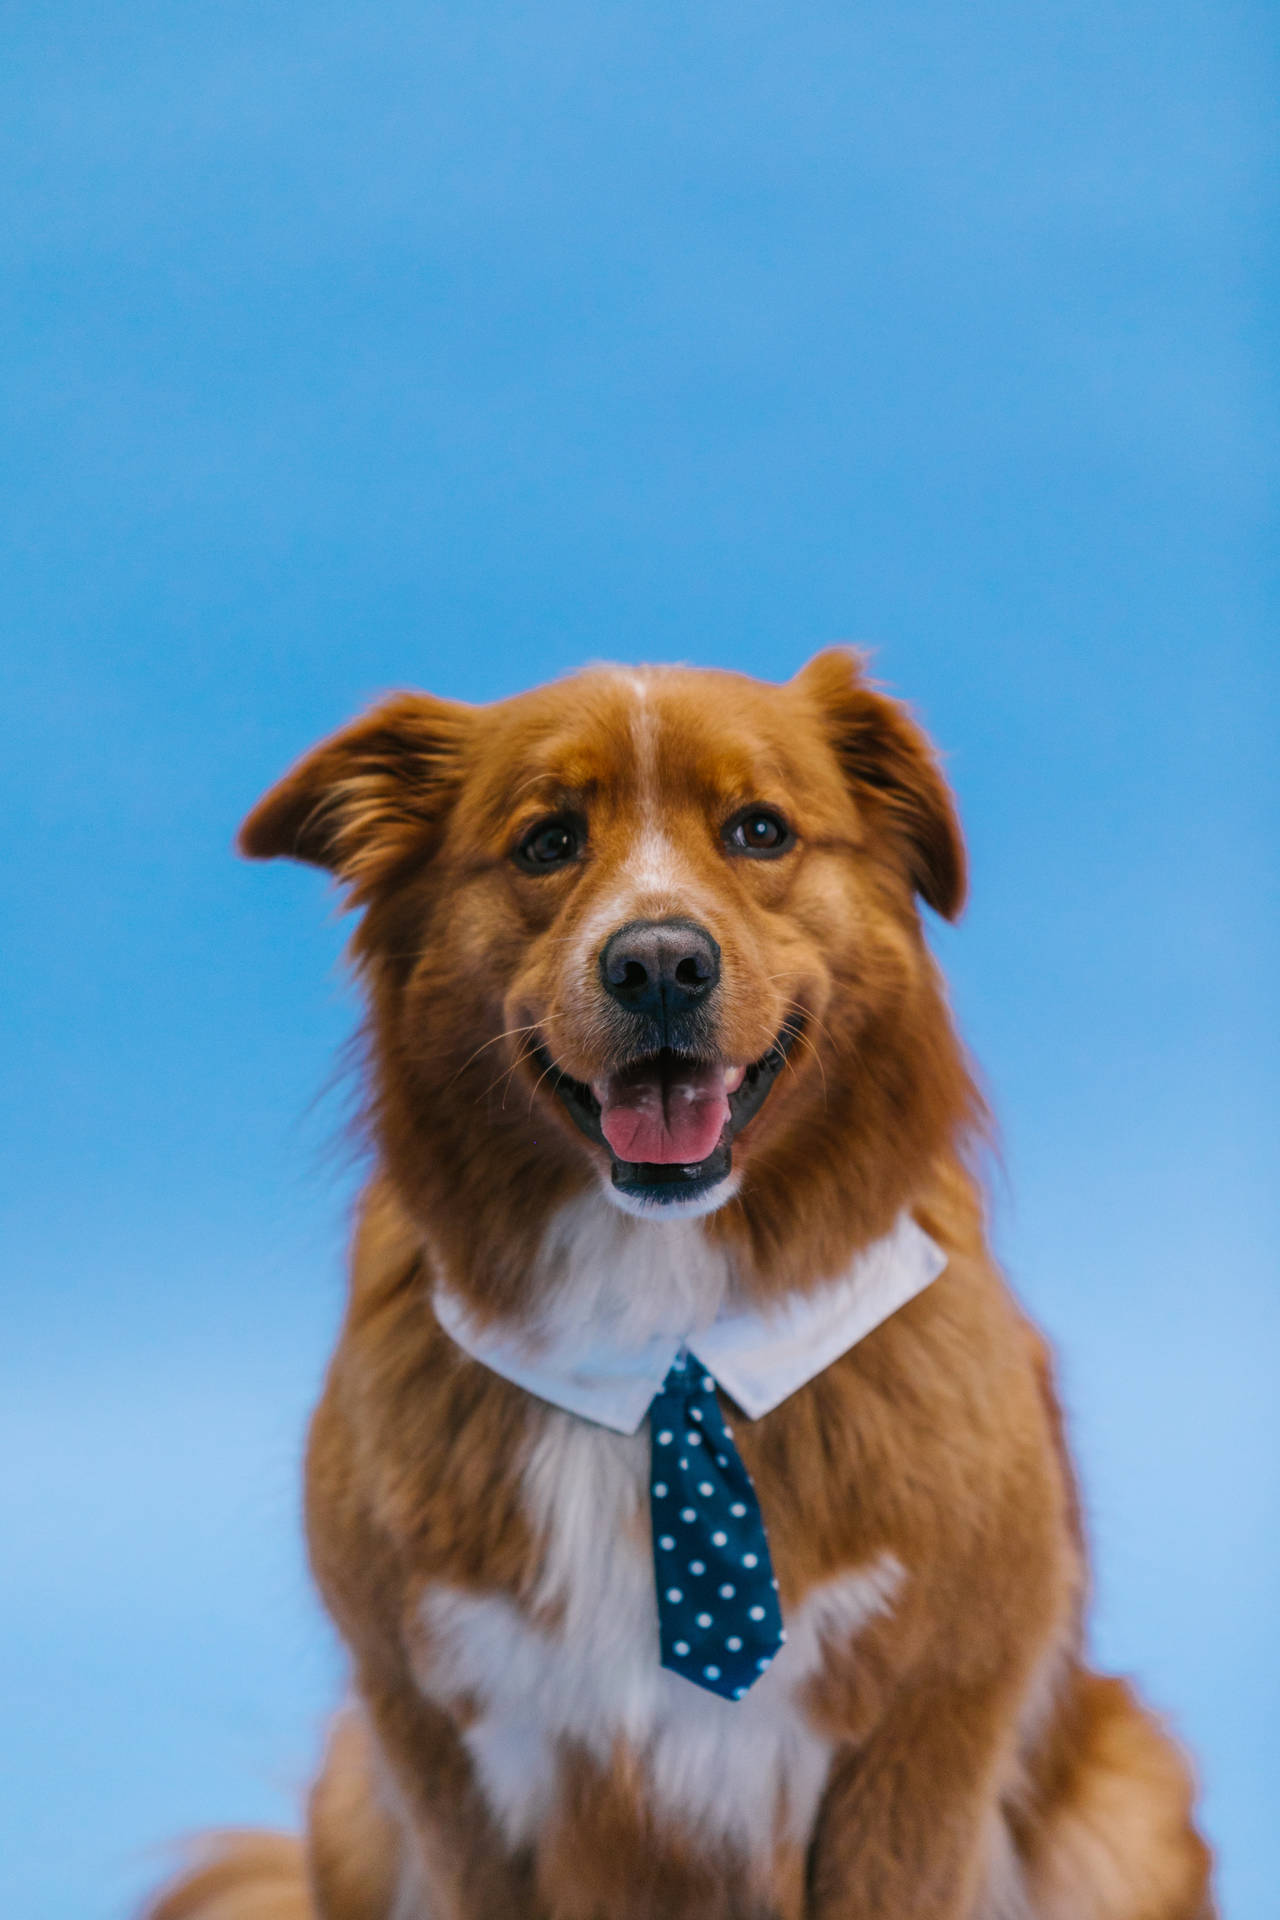 Cute Dog With Blue Tie